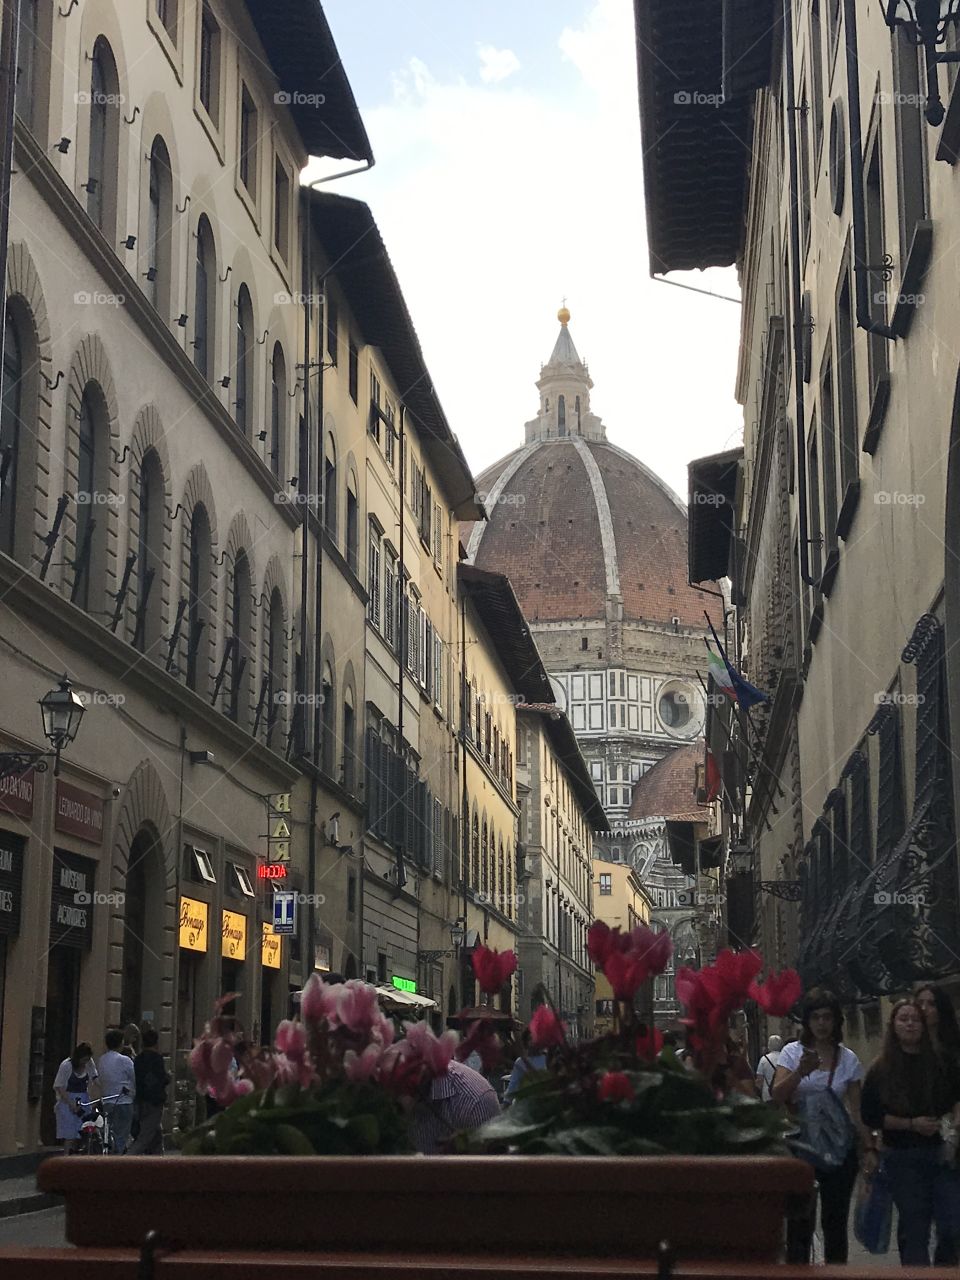 Blooms & The Duomo